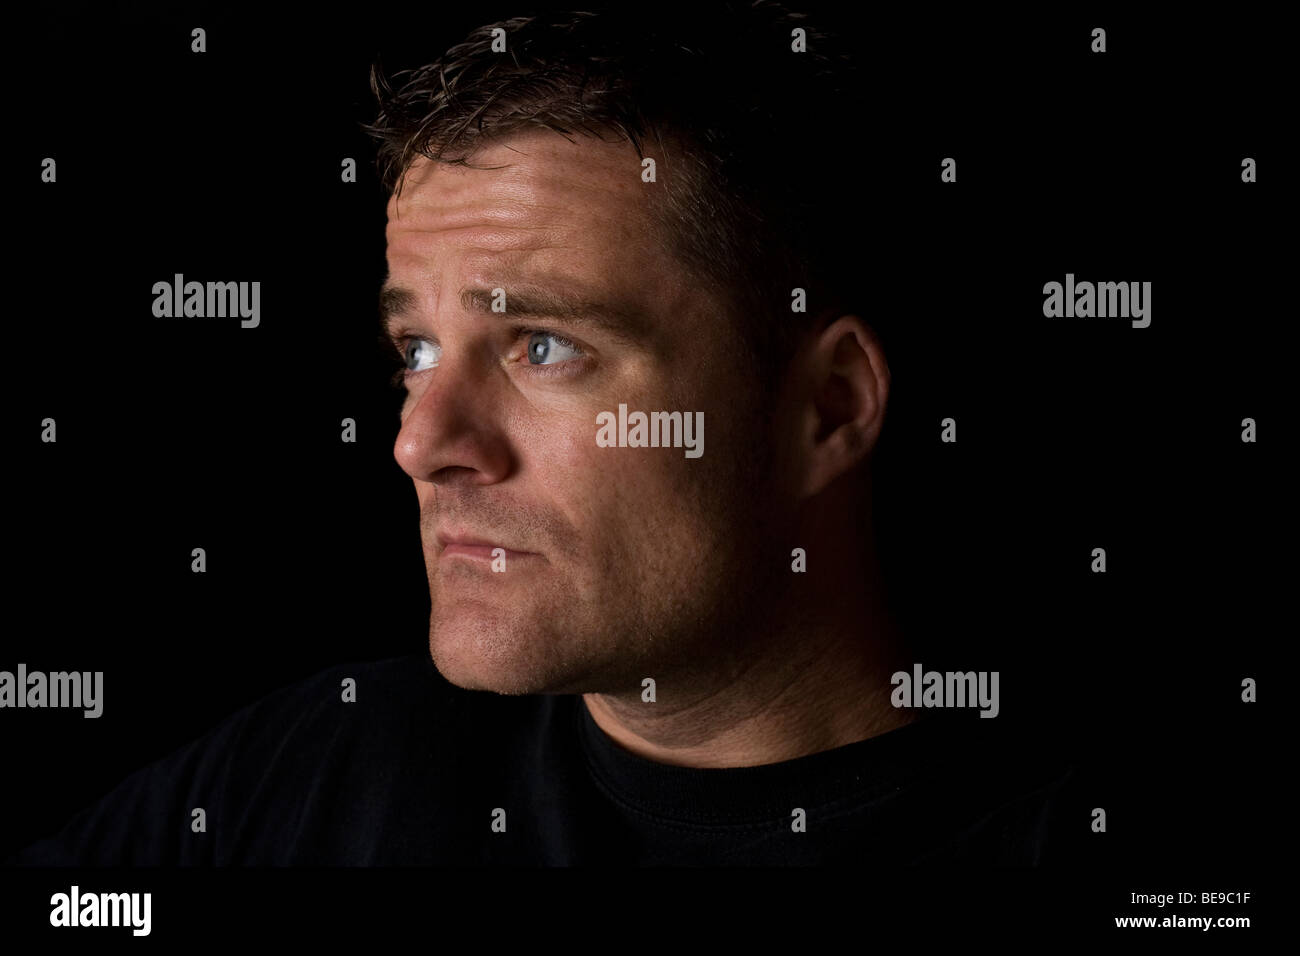 A portrait of a man staring away from the camera Stock Photo